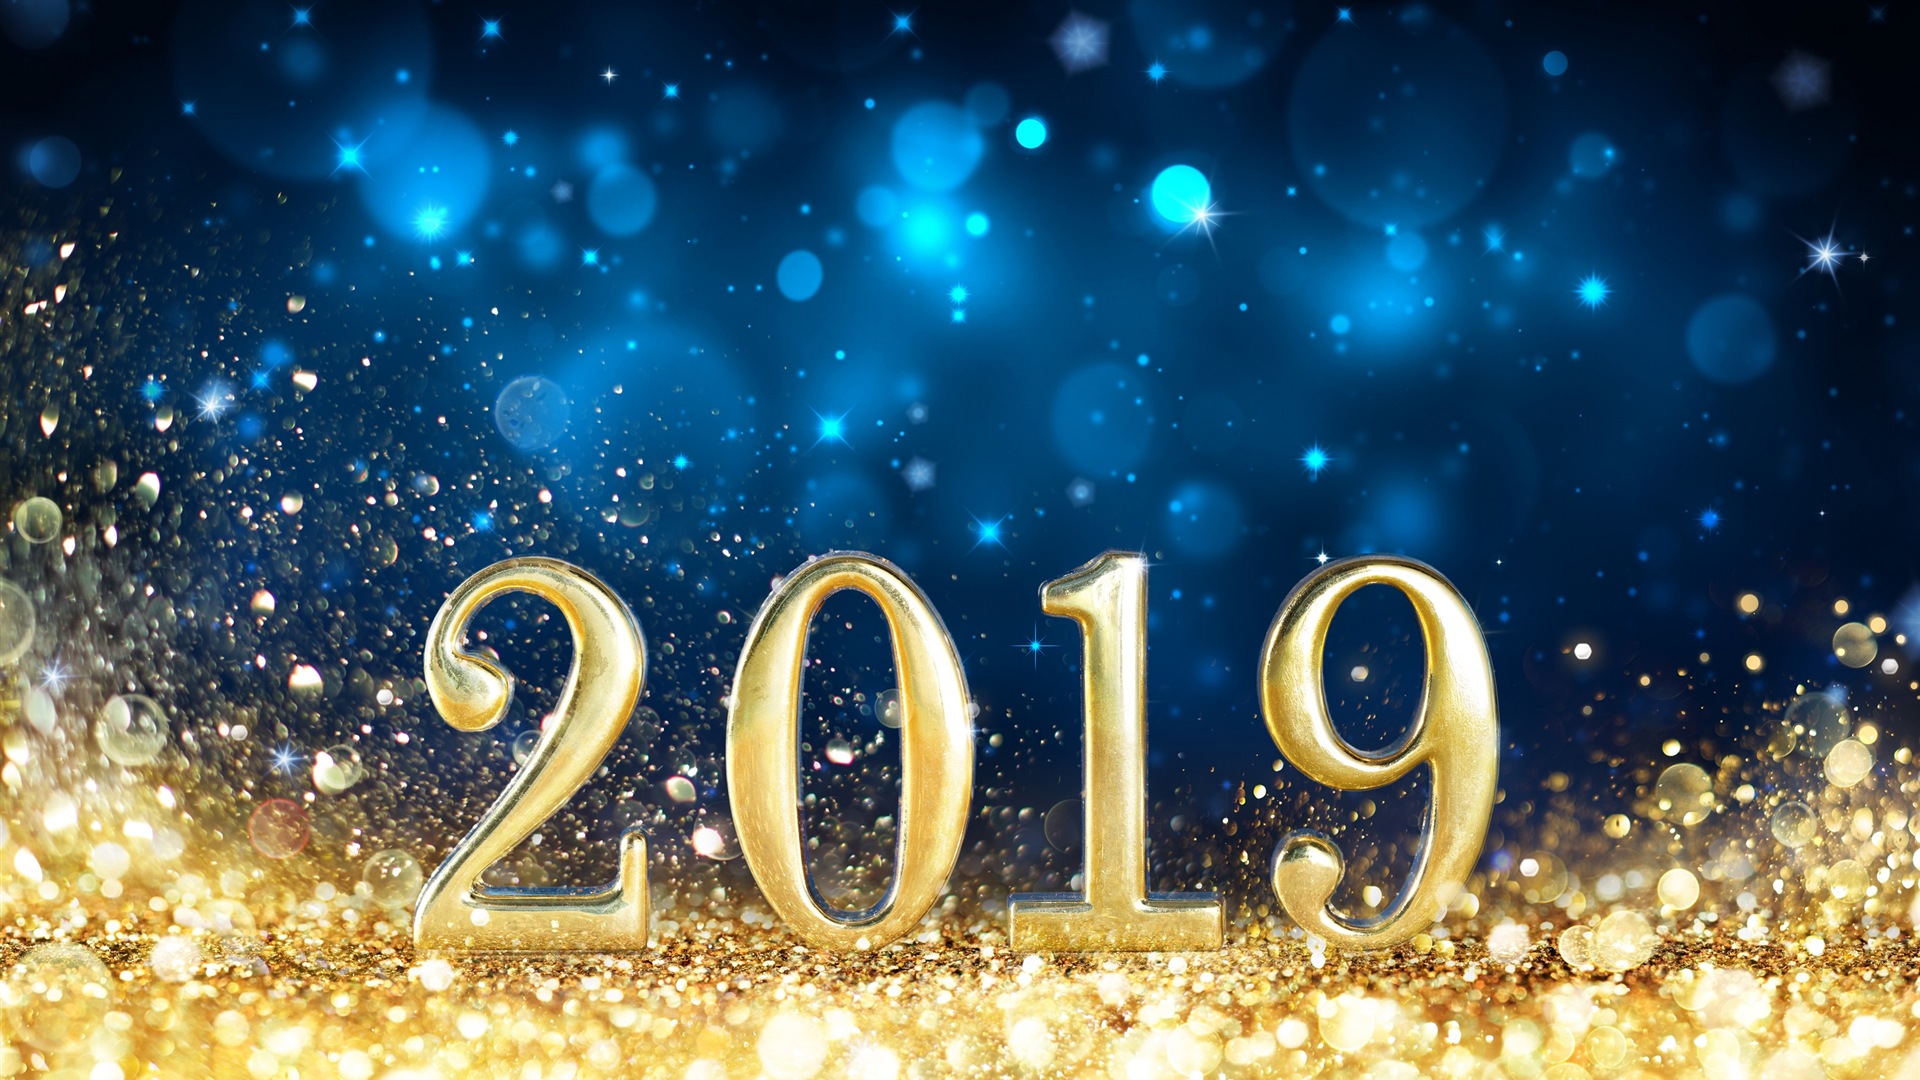 Happy New Year 2019 HD wallpapers #5 - 1920x1080